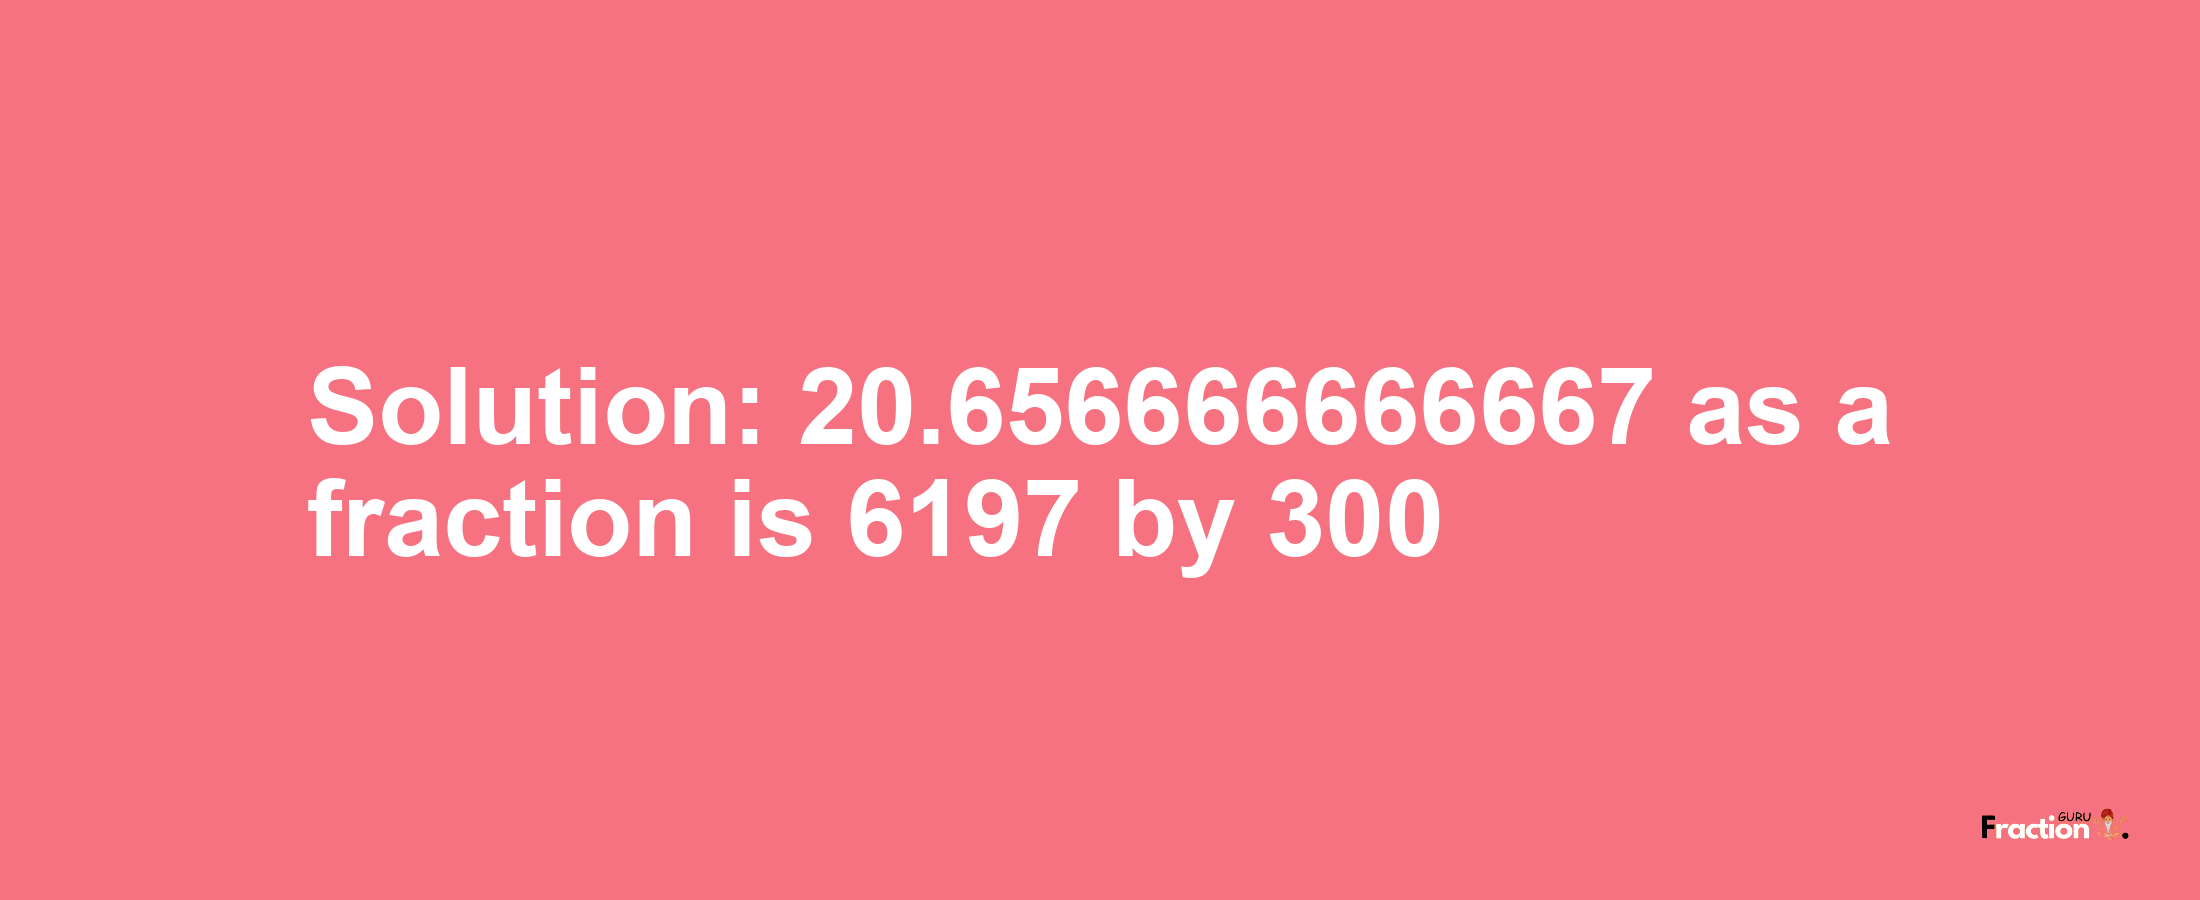 Solution:20.656666666667 as a fraction is 6197/300